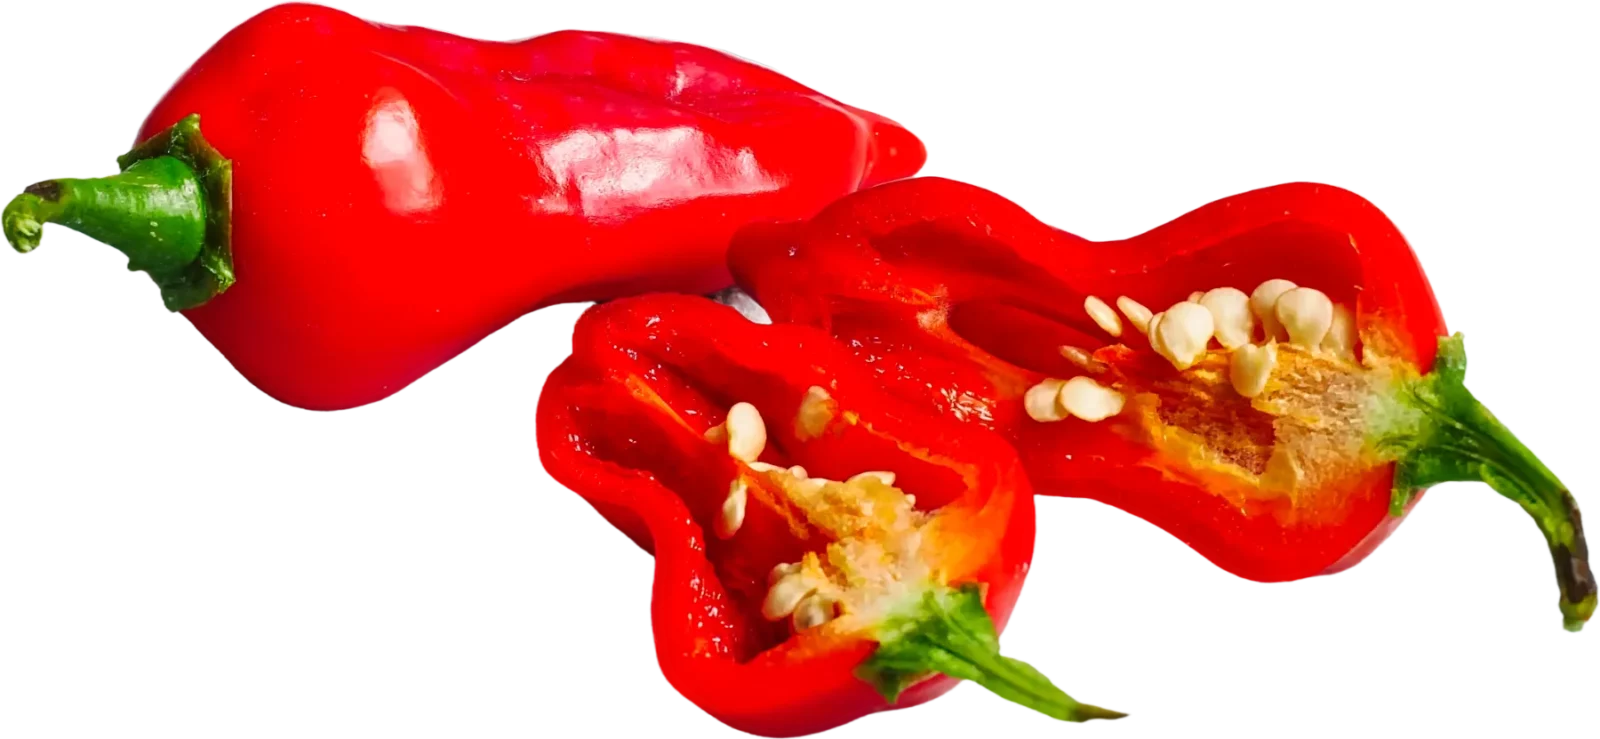 red chilli pepper sliced open with seeds showing